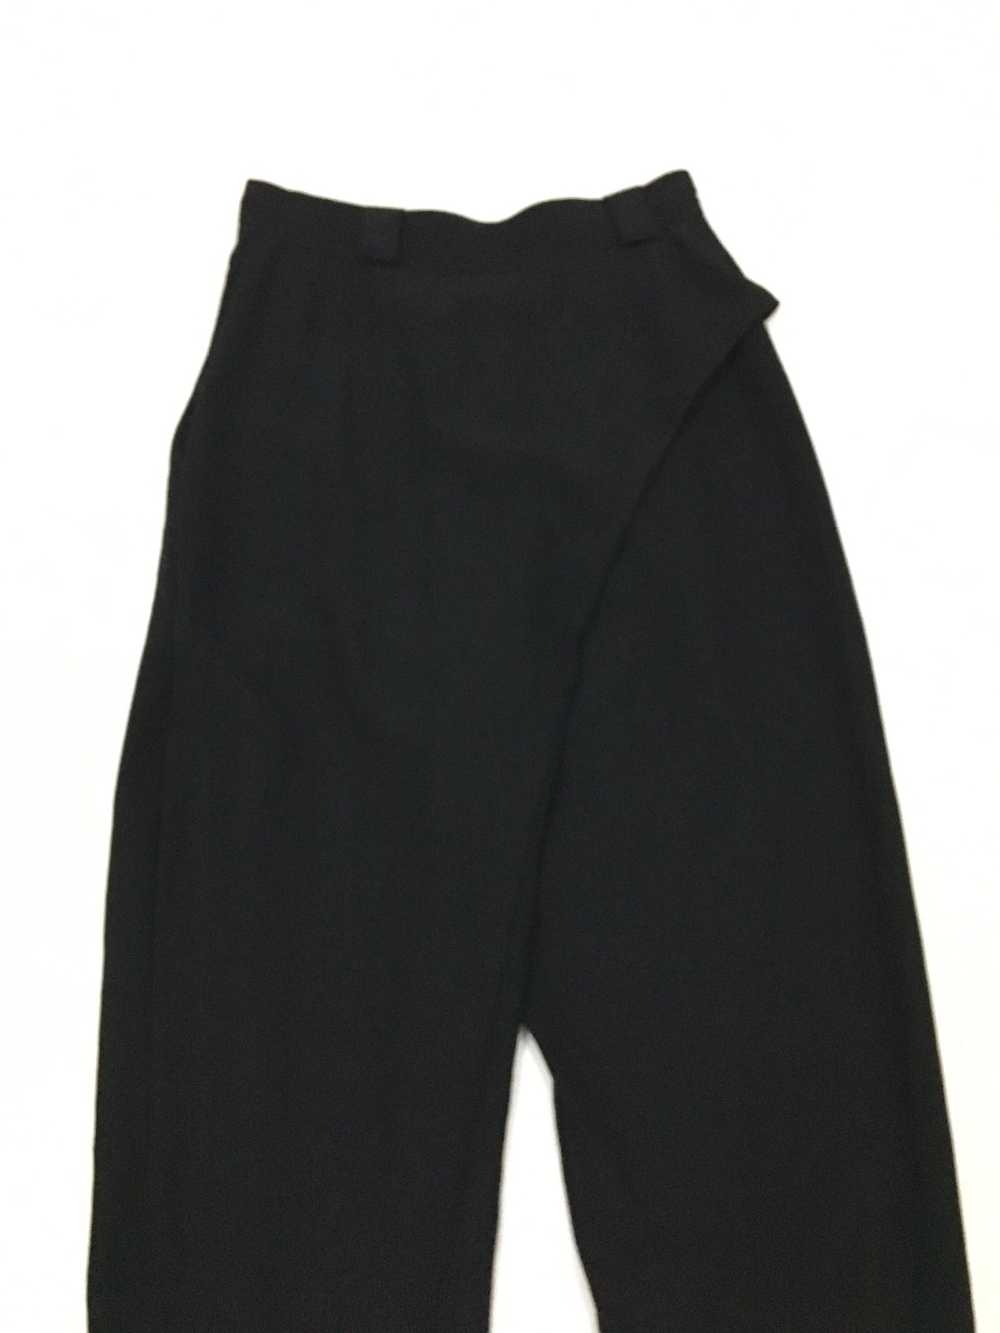 Versace Archive Assymetrical Wool Pants - image 6